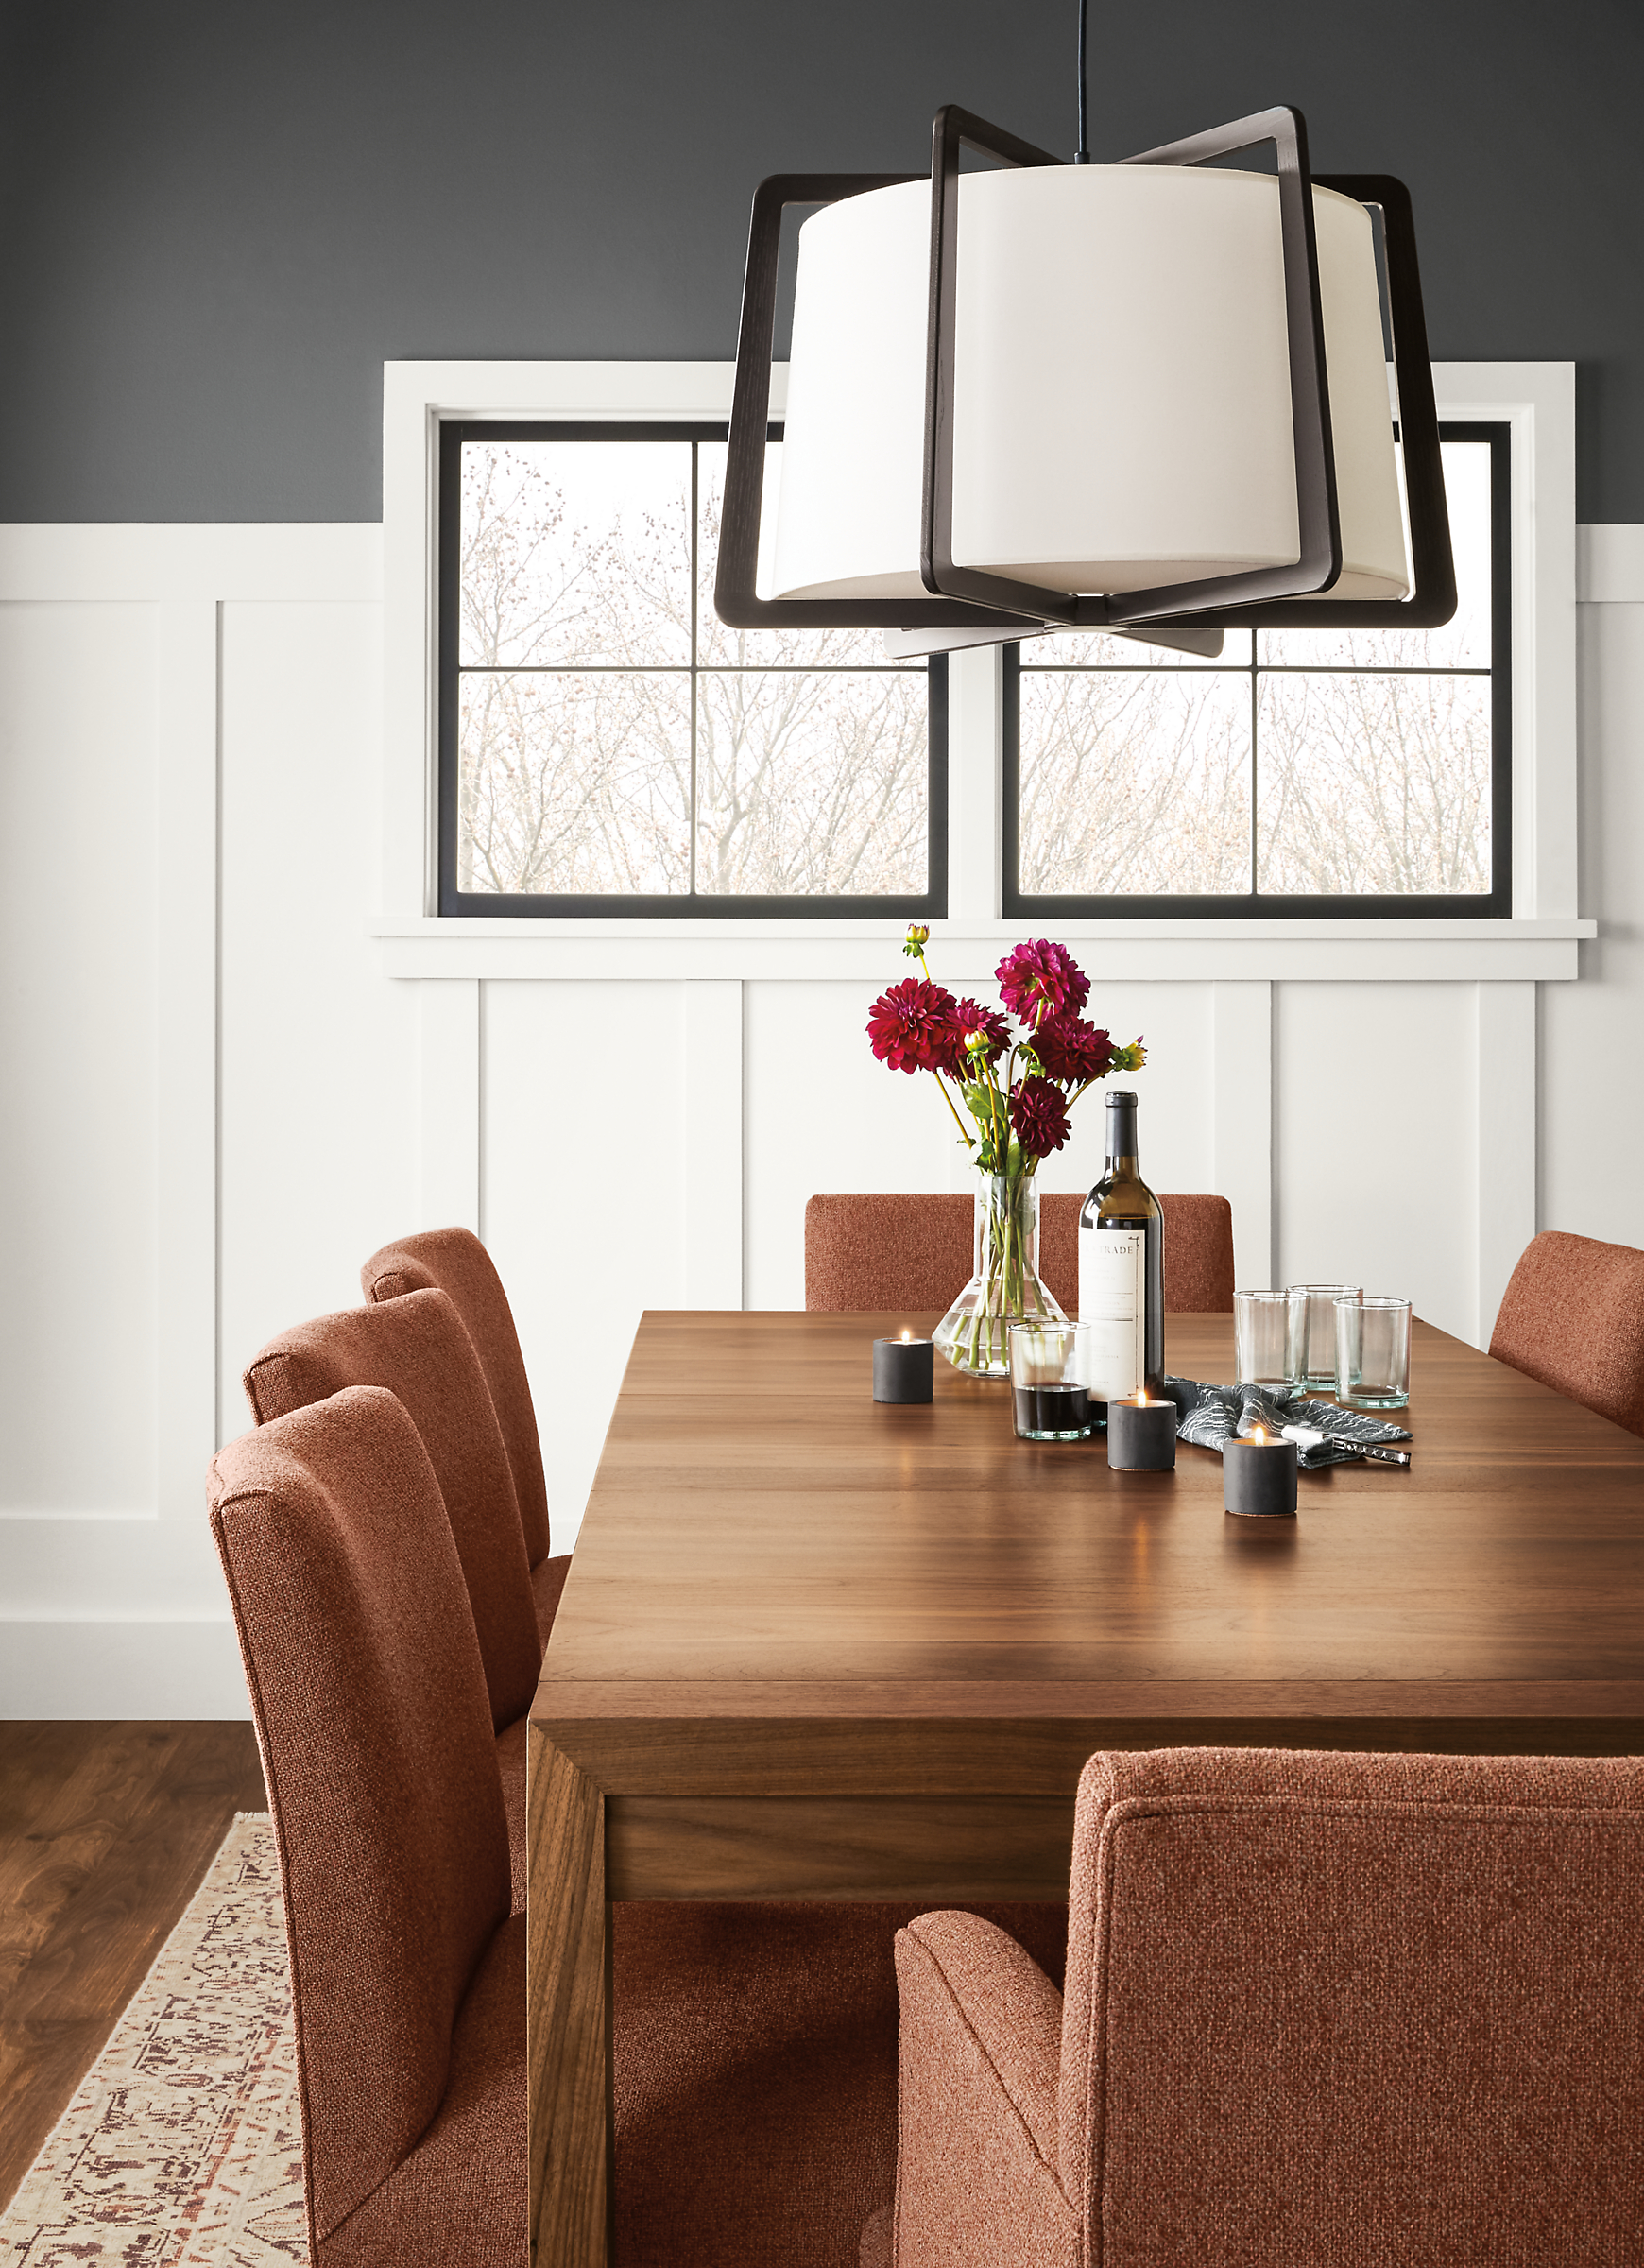 Detail of Walsh extension table in walnut in dining room with Marie chairs.